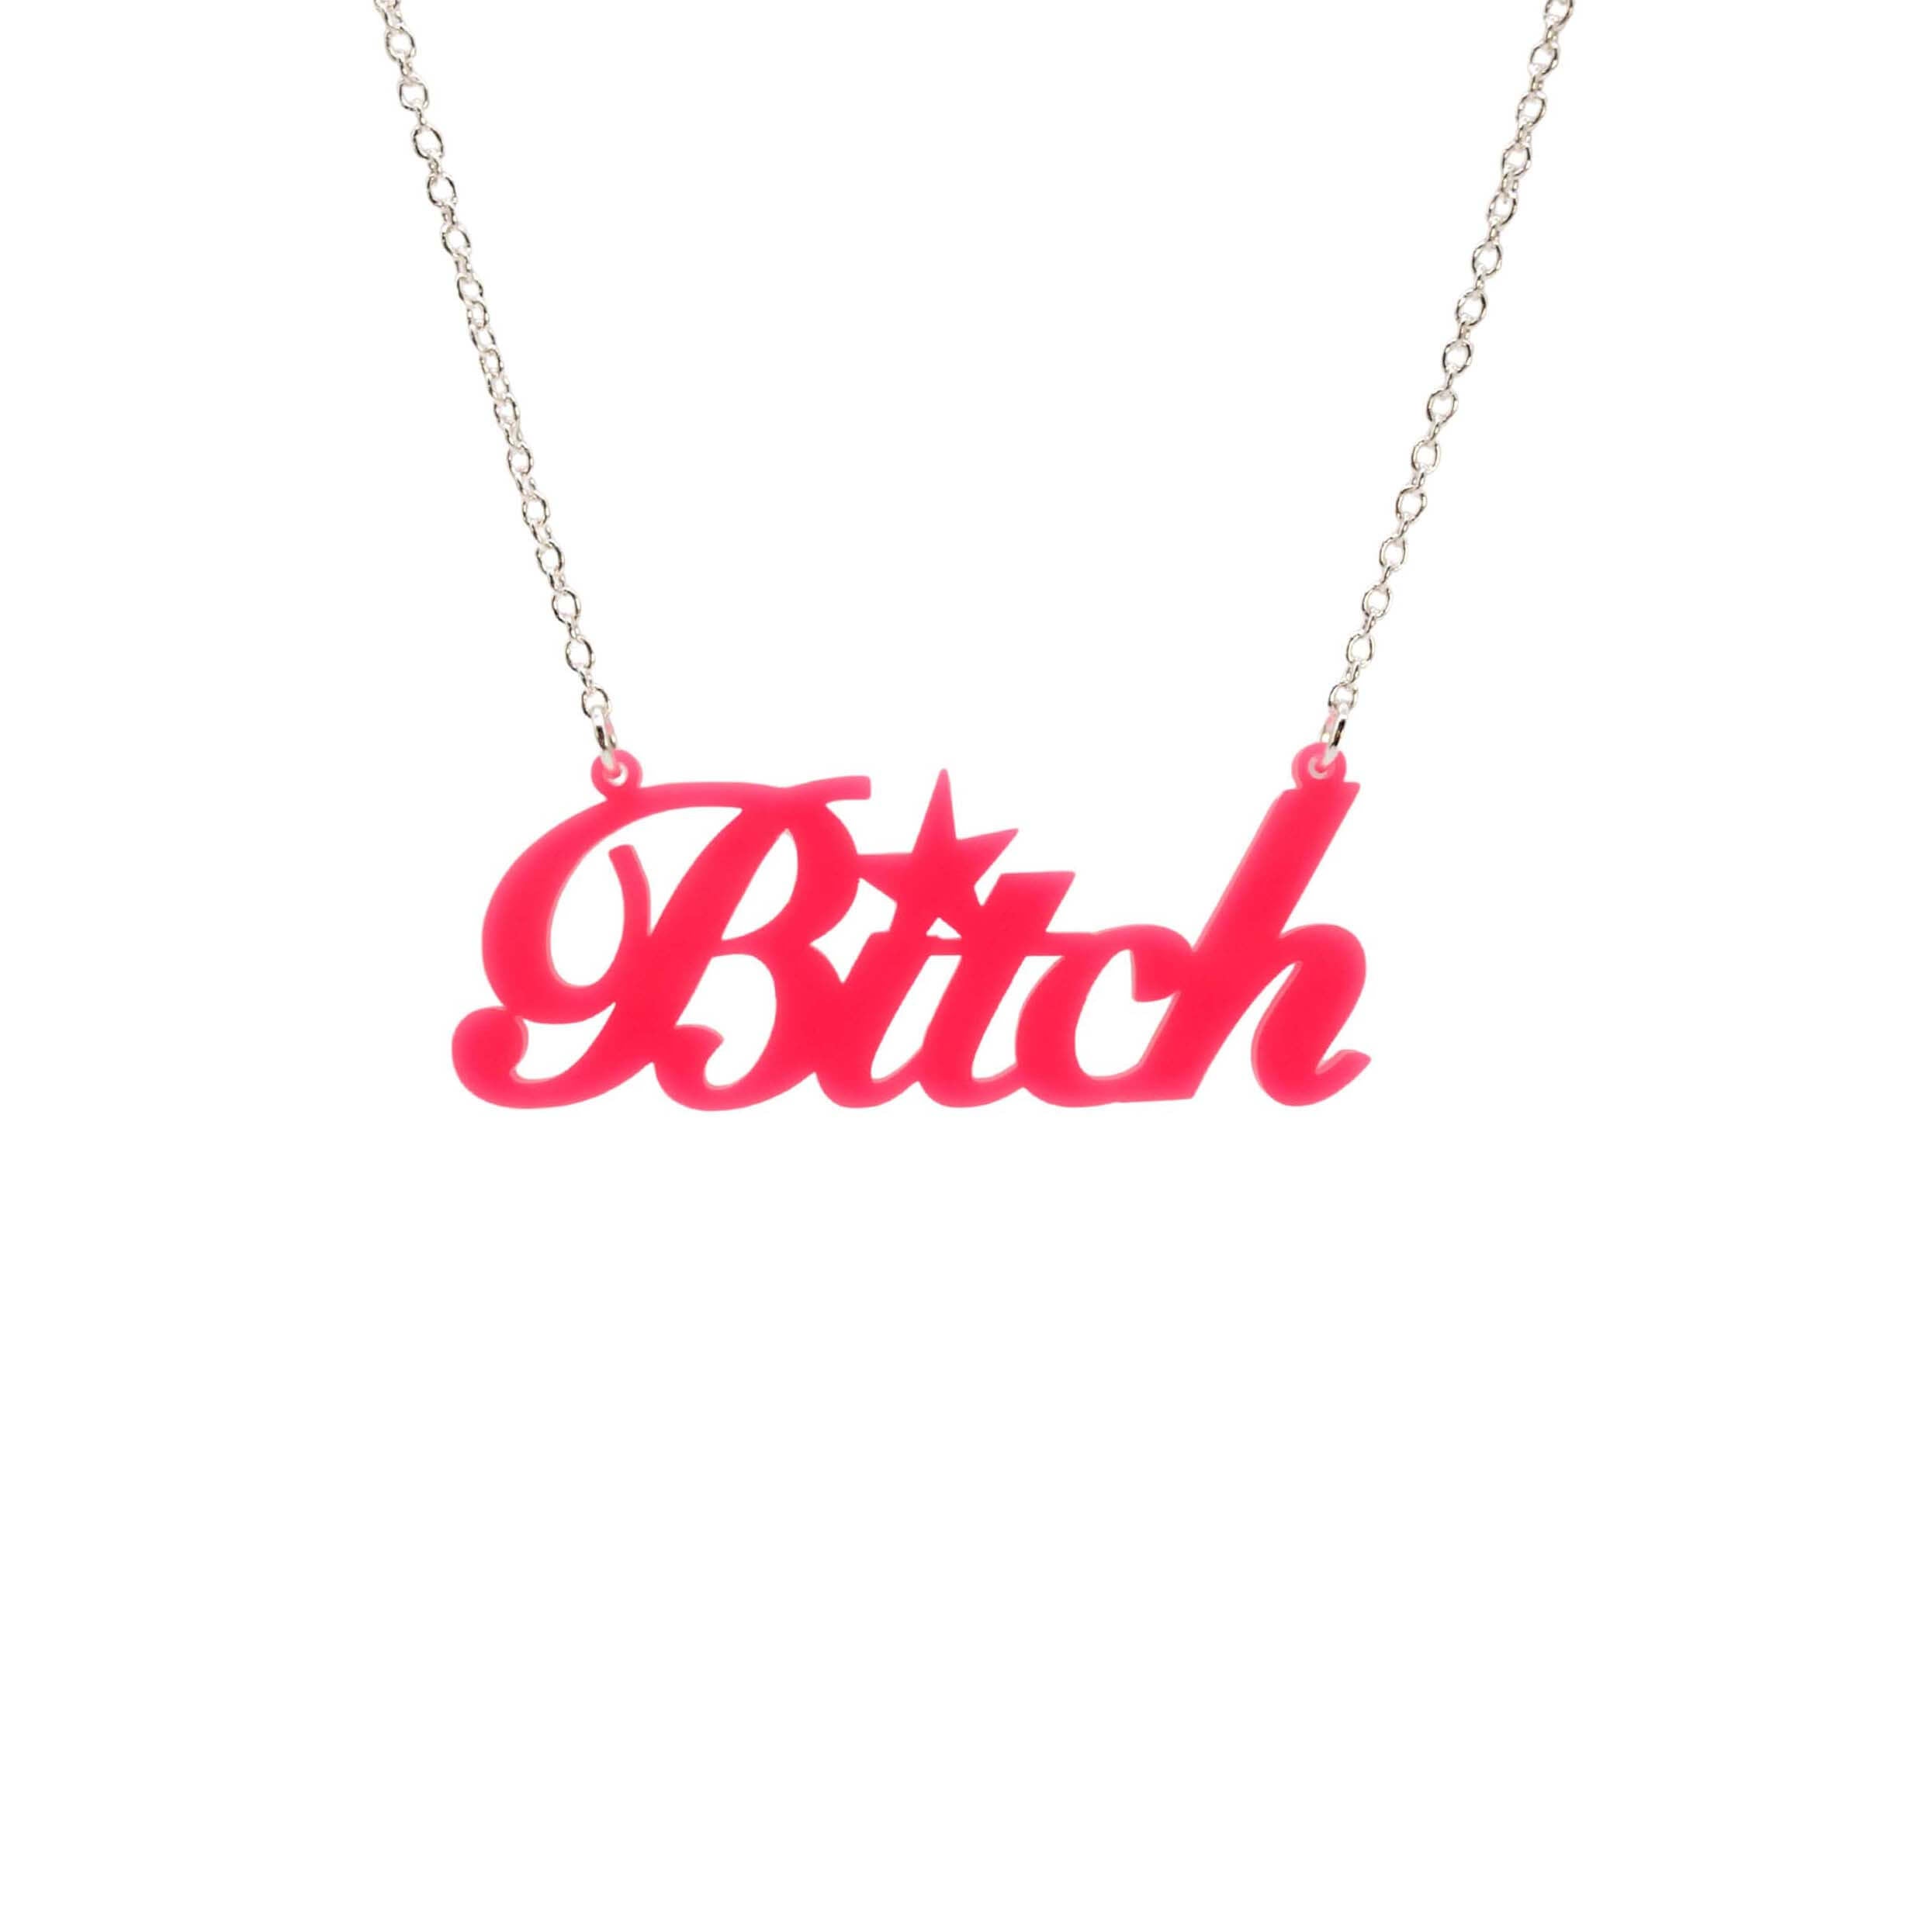 B*tch necklace in hot pink shown hanging against a white background. £2 goes to Bloody Good Period. 